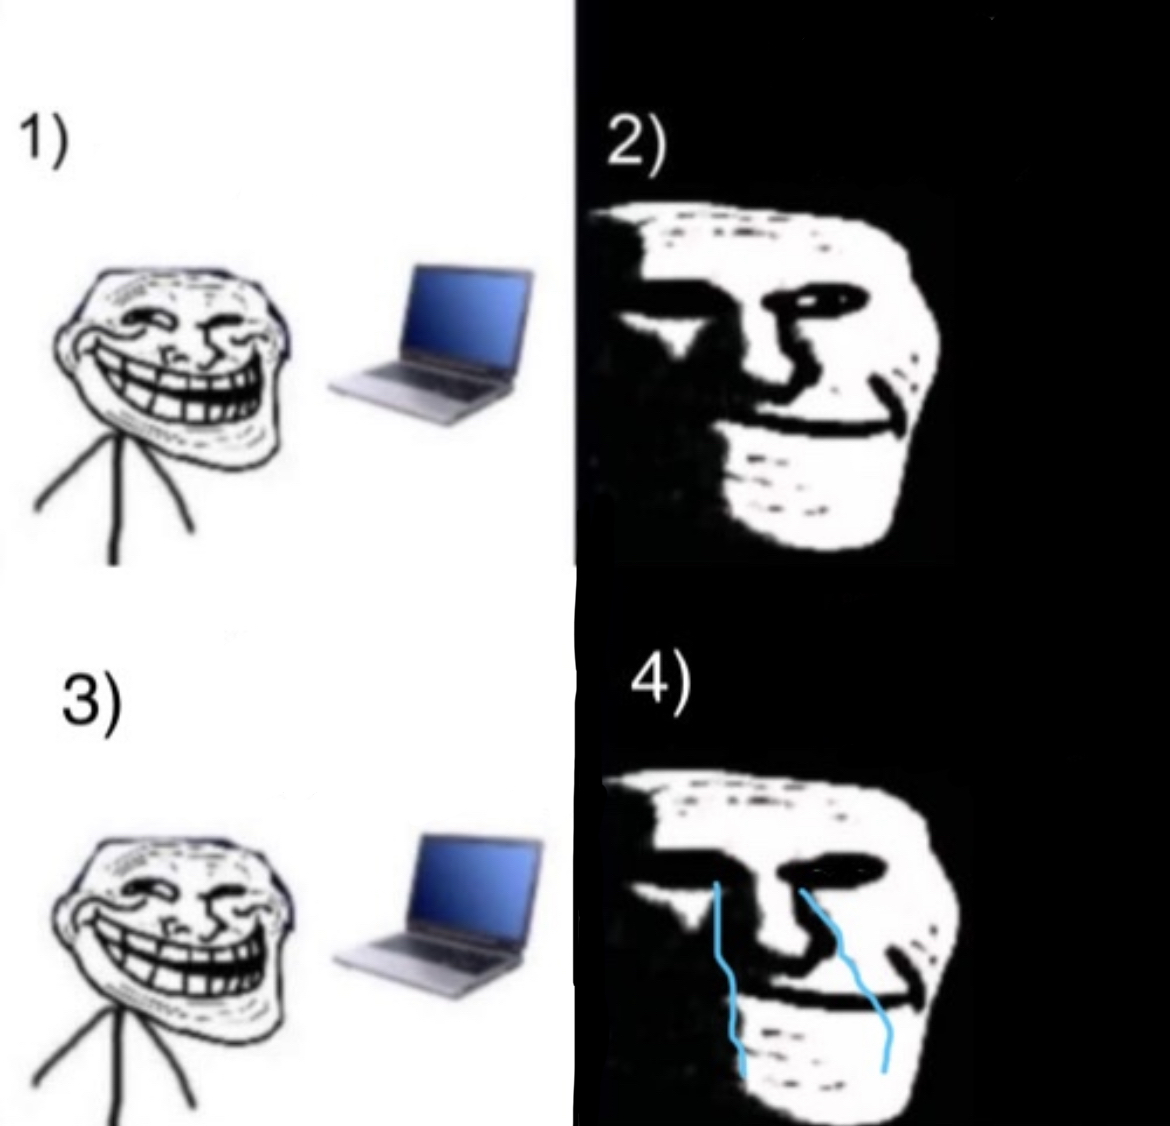 troll face with depression :( - Imgflip